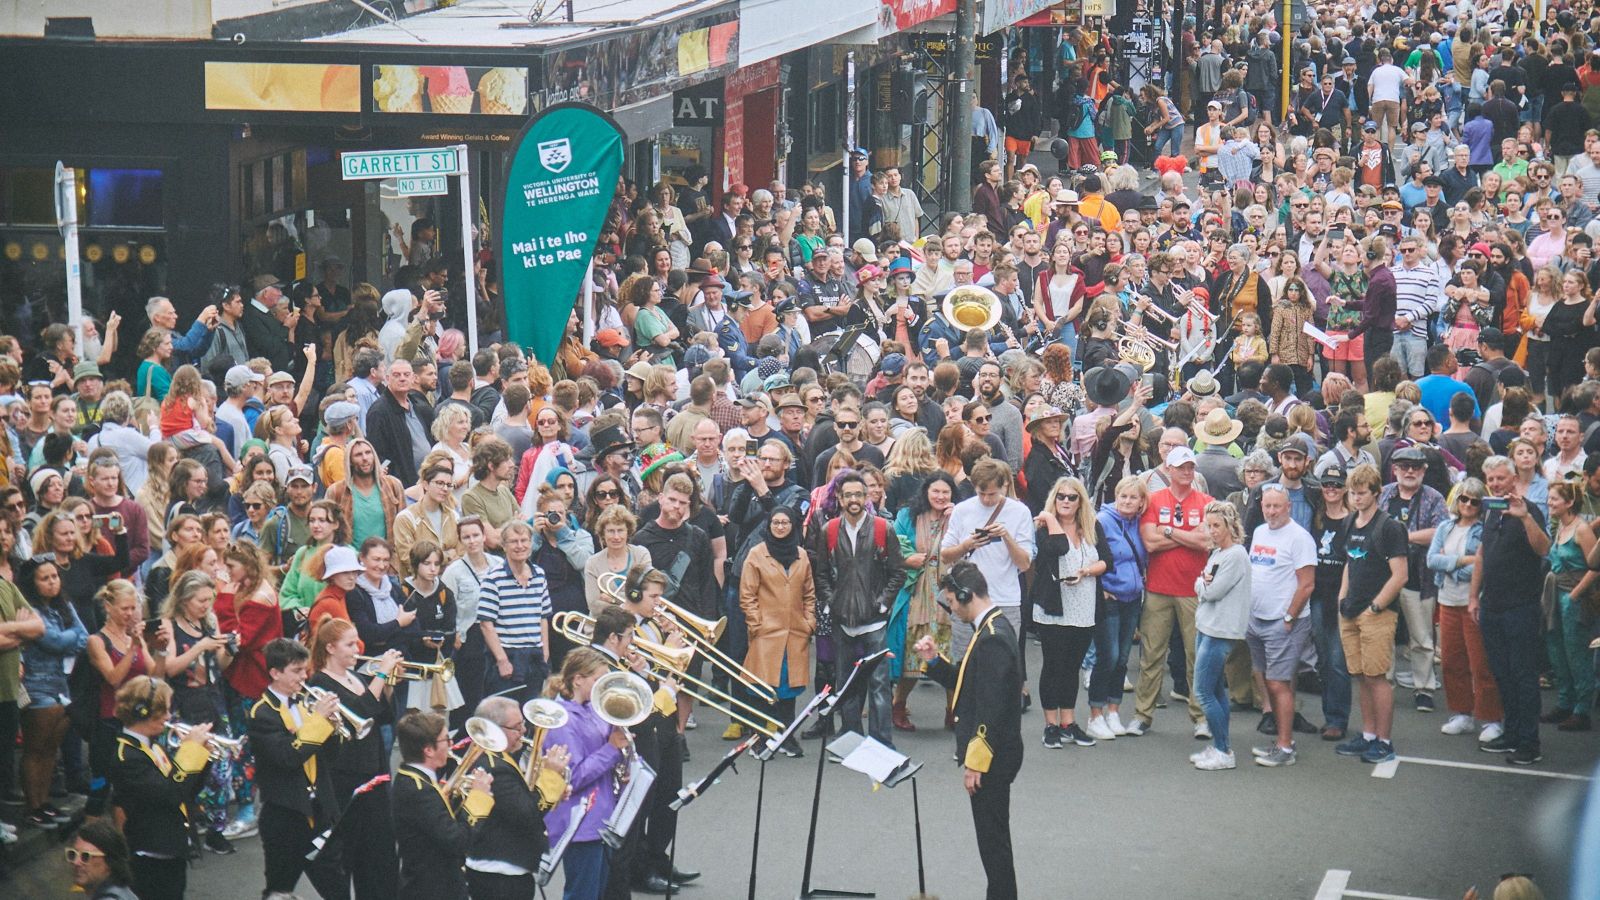 Image of the brass band performing to a crowd at Garrett st. 